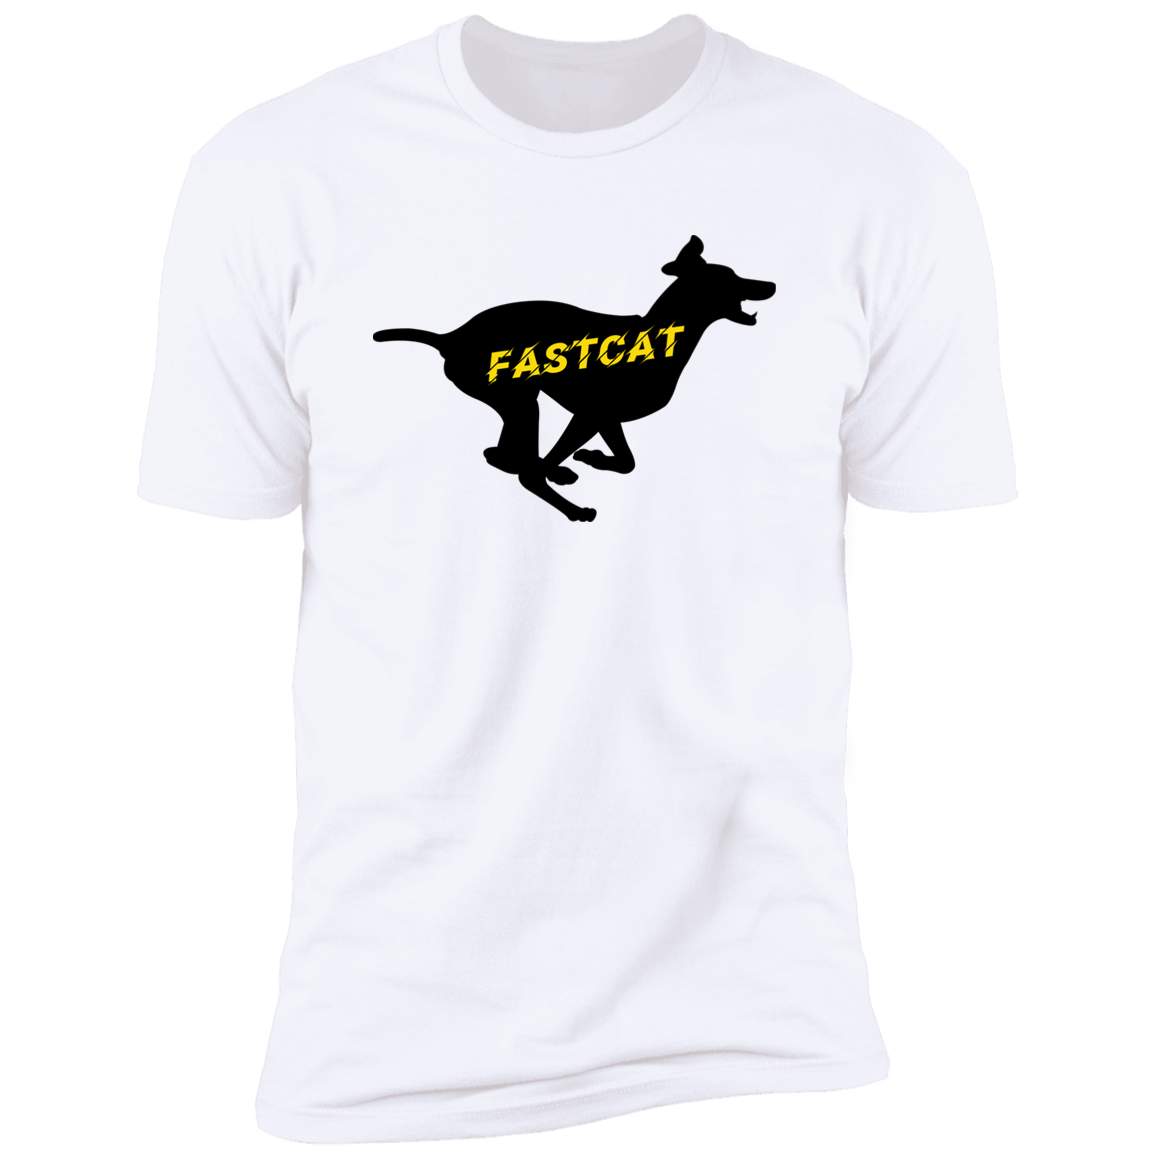 FastCAT Dog T-shirt, sporting dog t-shirt for humans, FastCAT t-shirt, in white